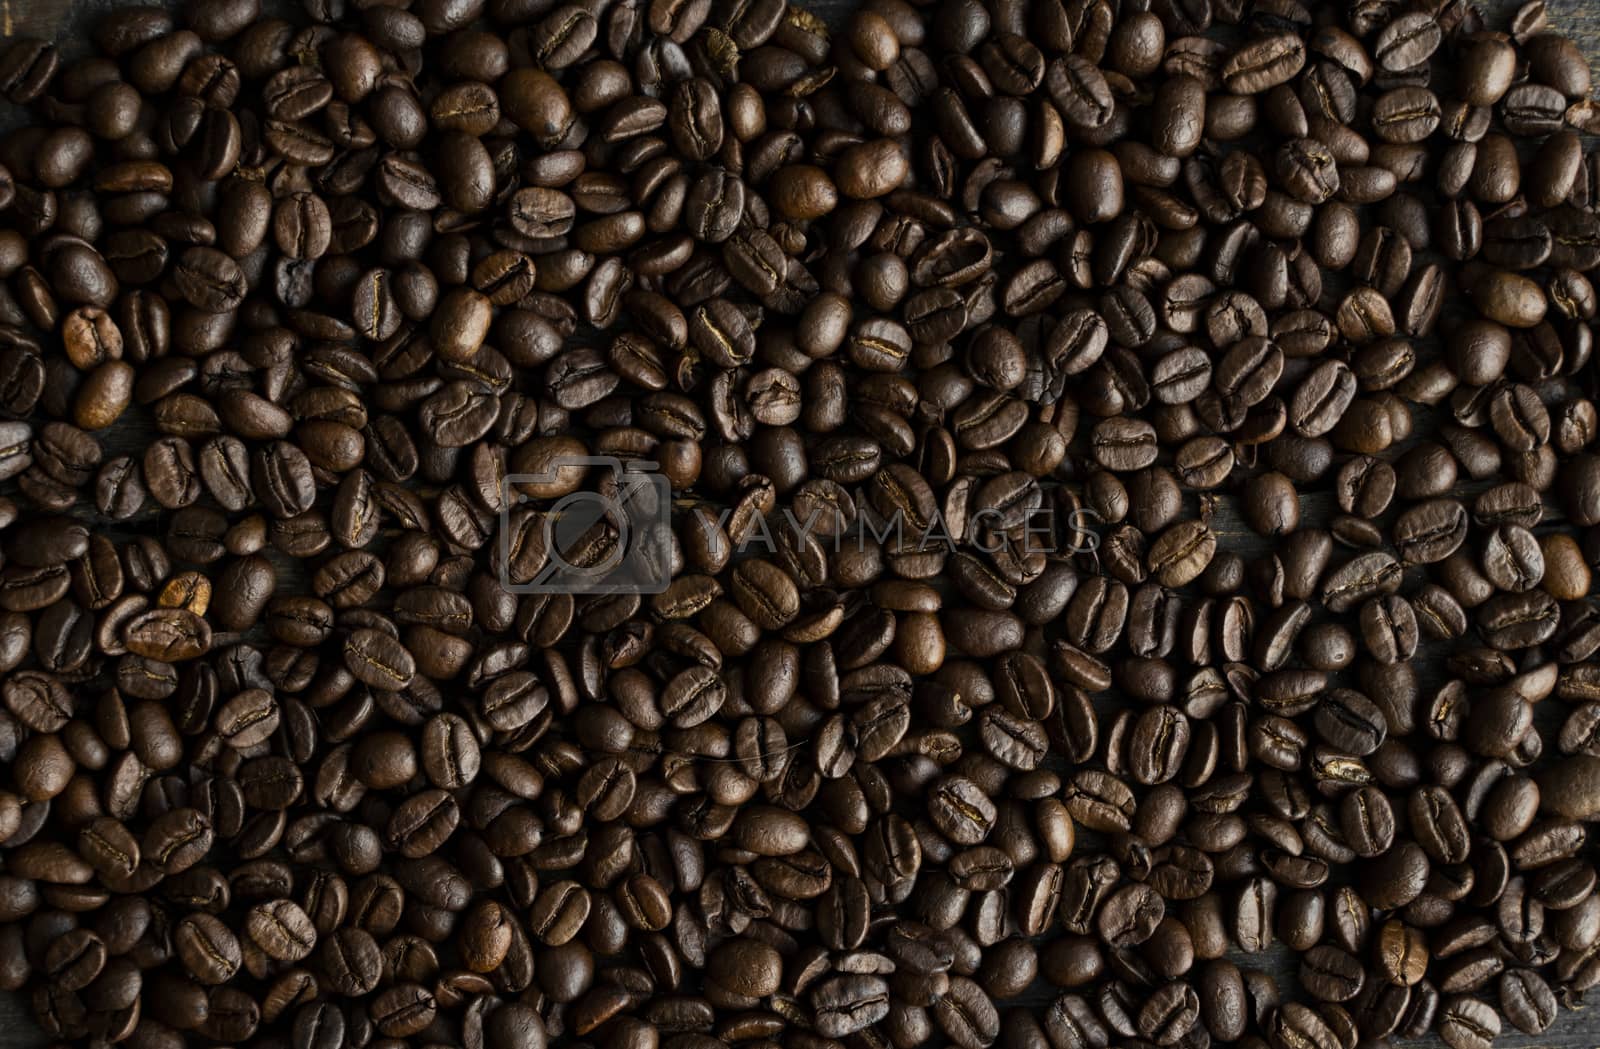 Royalty free image of Fresh arabica coffee beans as a texture or background. by vovsht